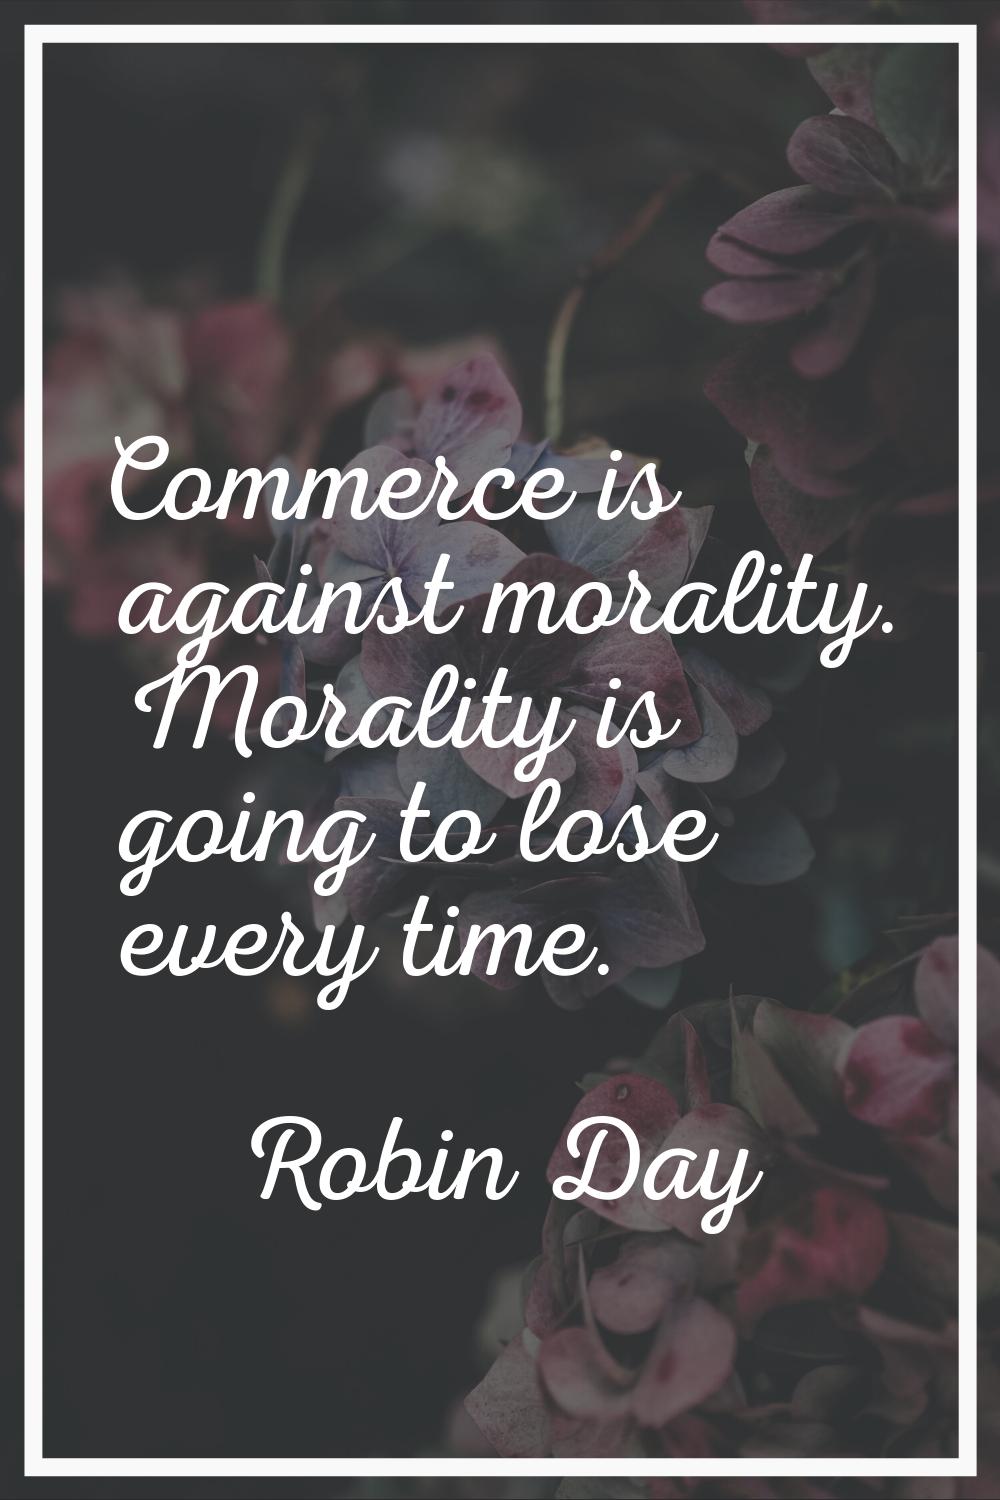 Commerce is against morality. Morality is going to lose every time.